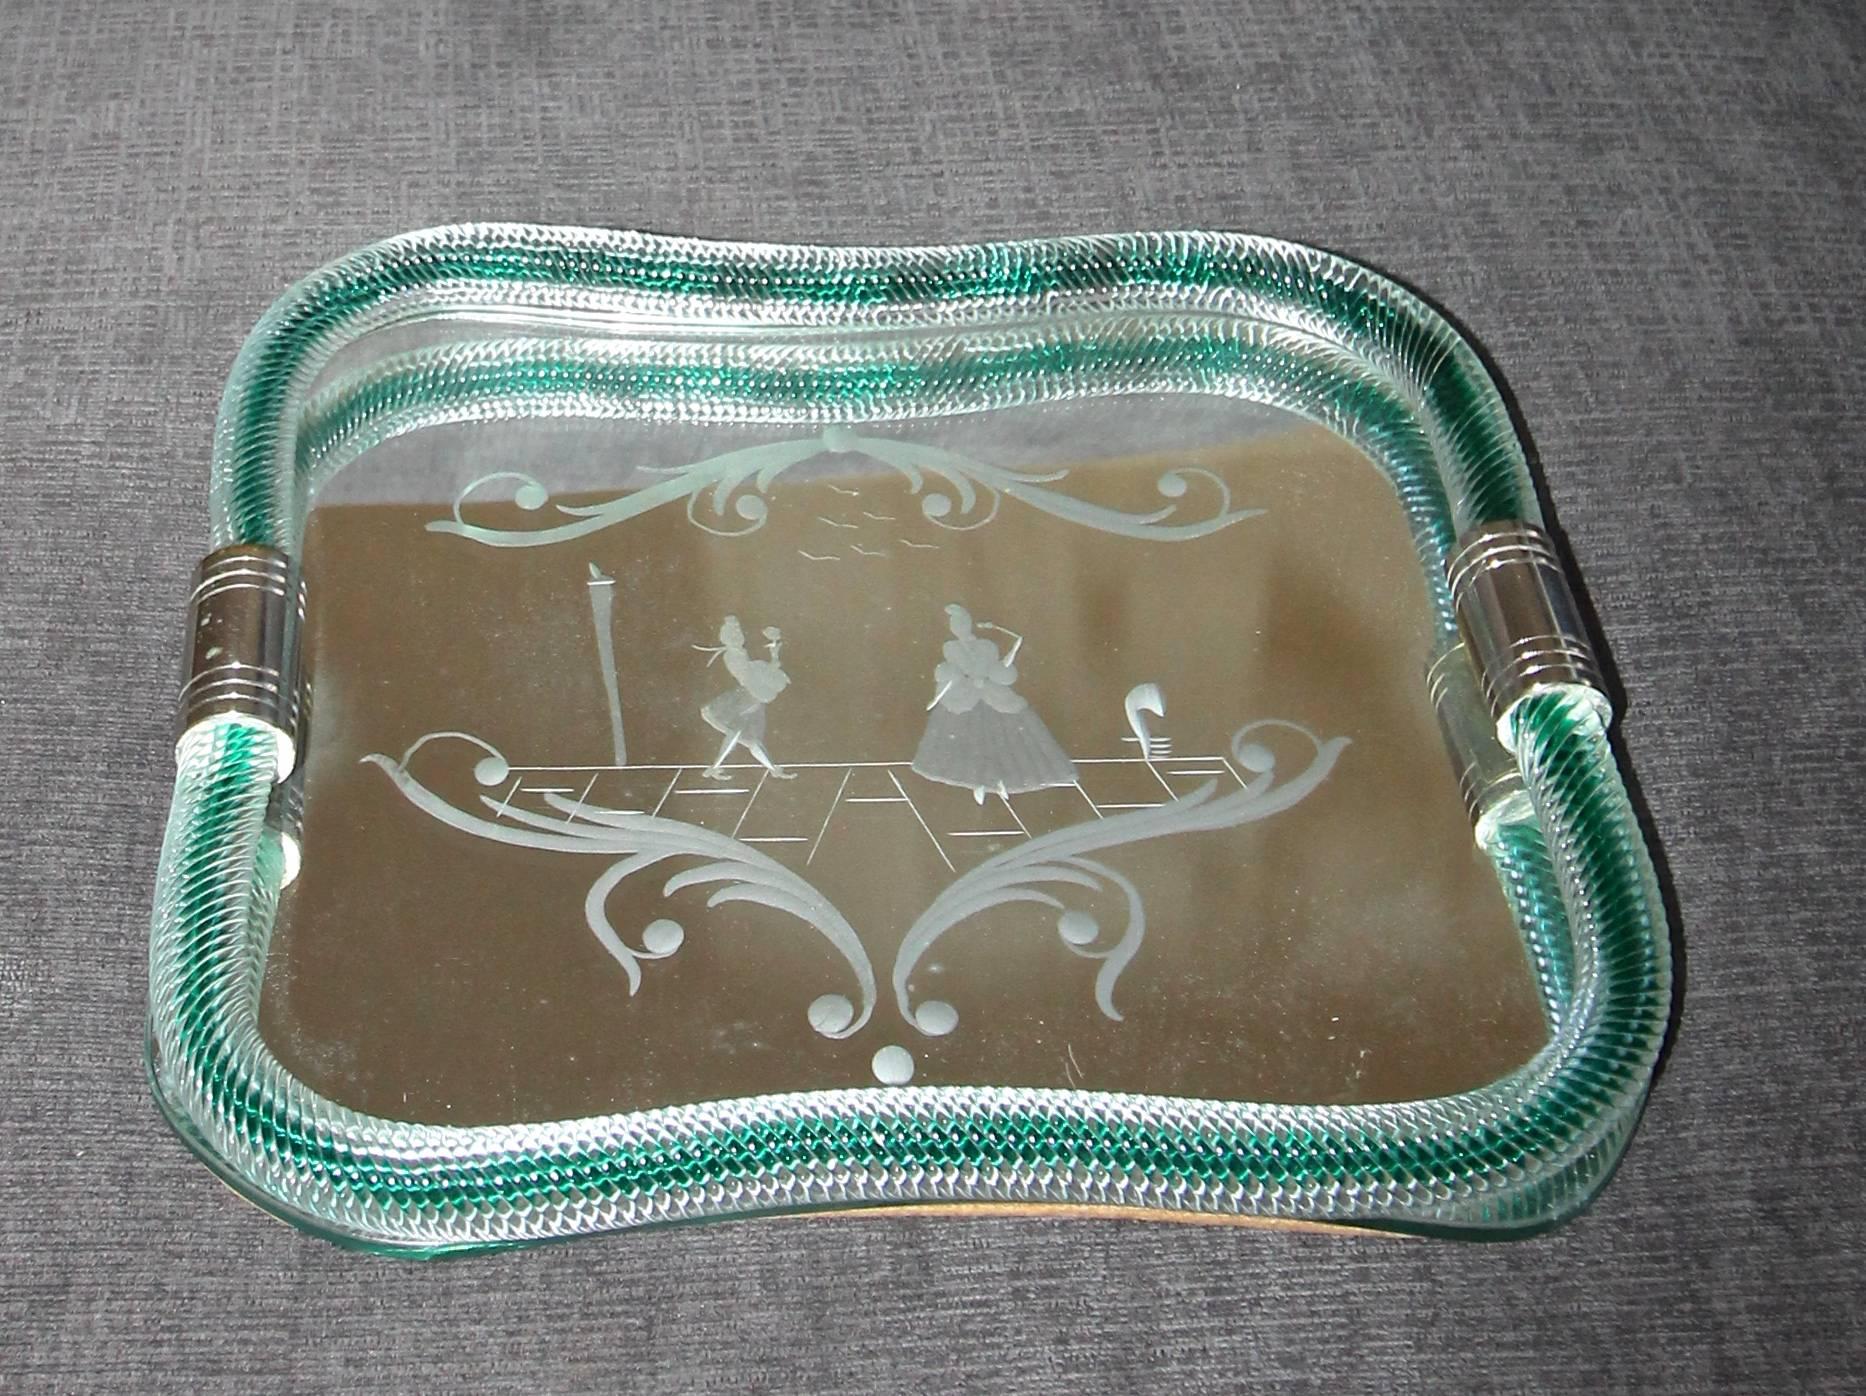 Murano finely twisted clear glass and emerald green rope vanity tray. Tray has nickel plated fittings and mirrored glass with classical etched figures.